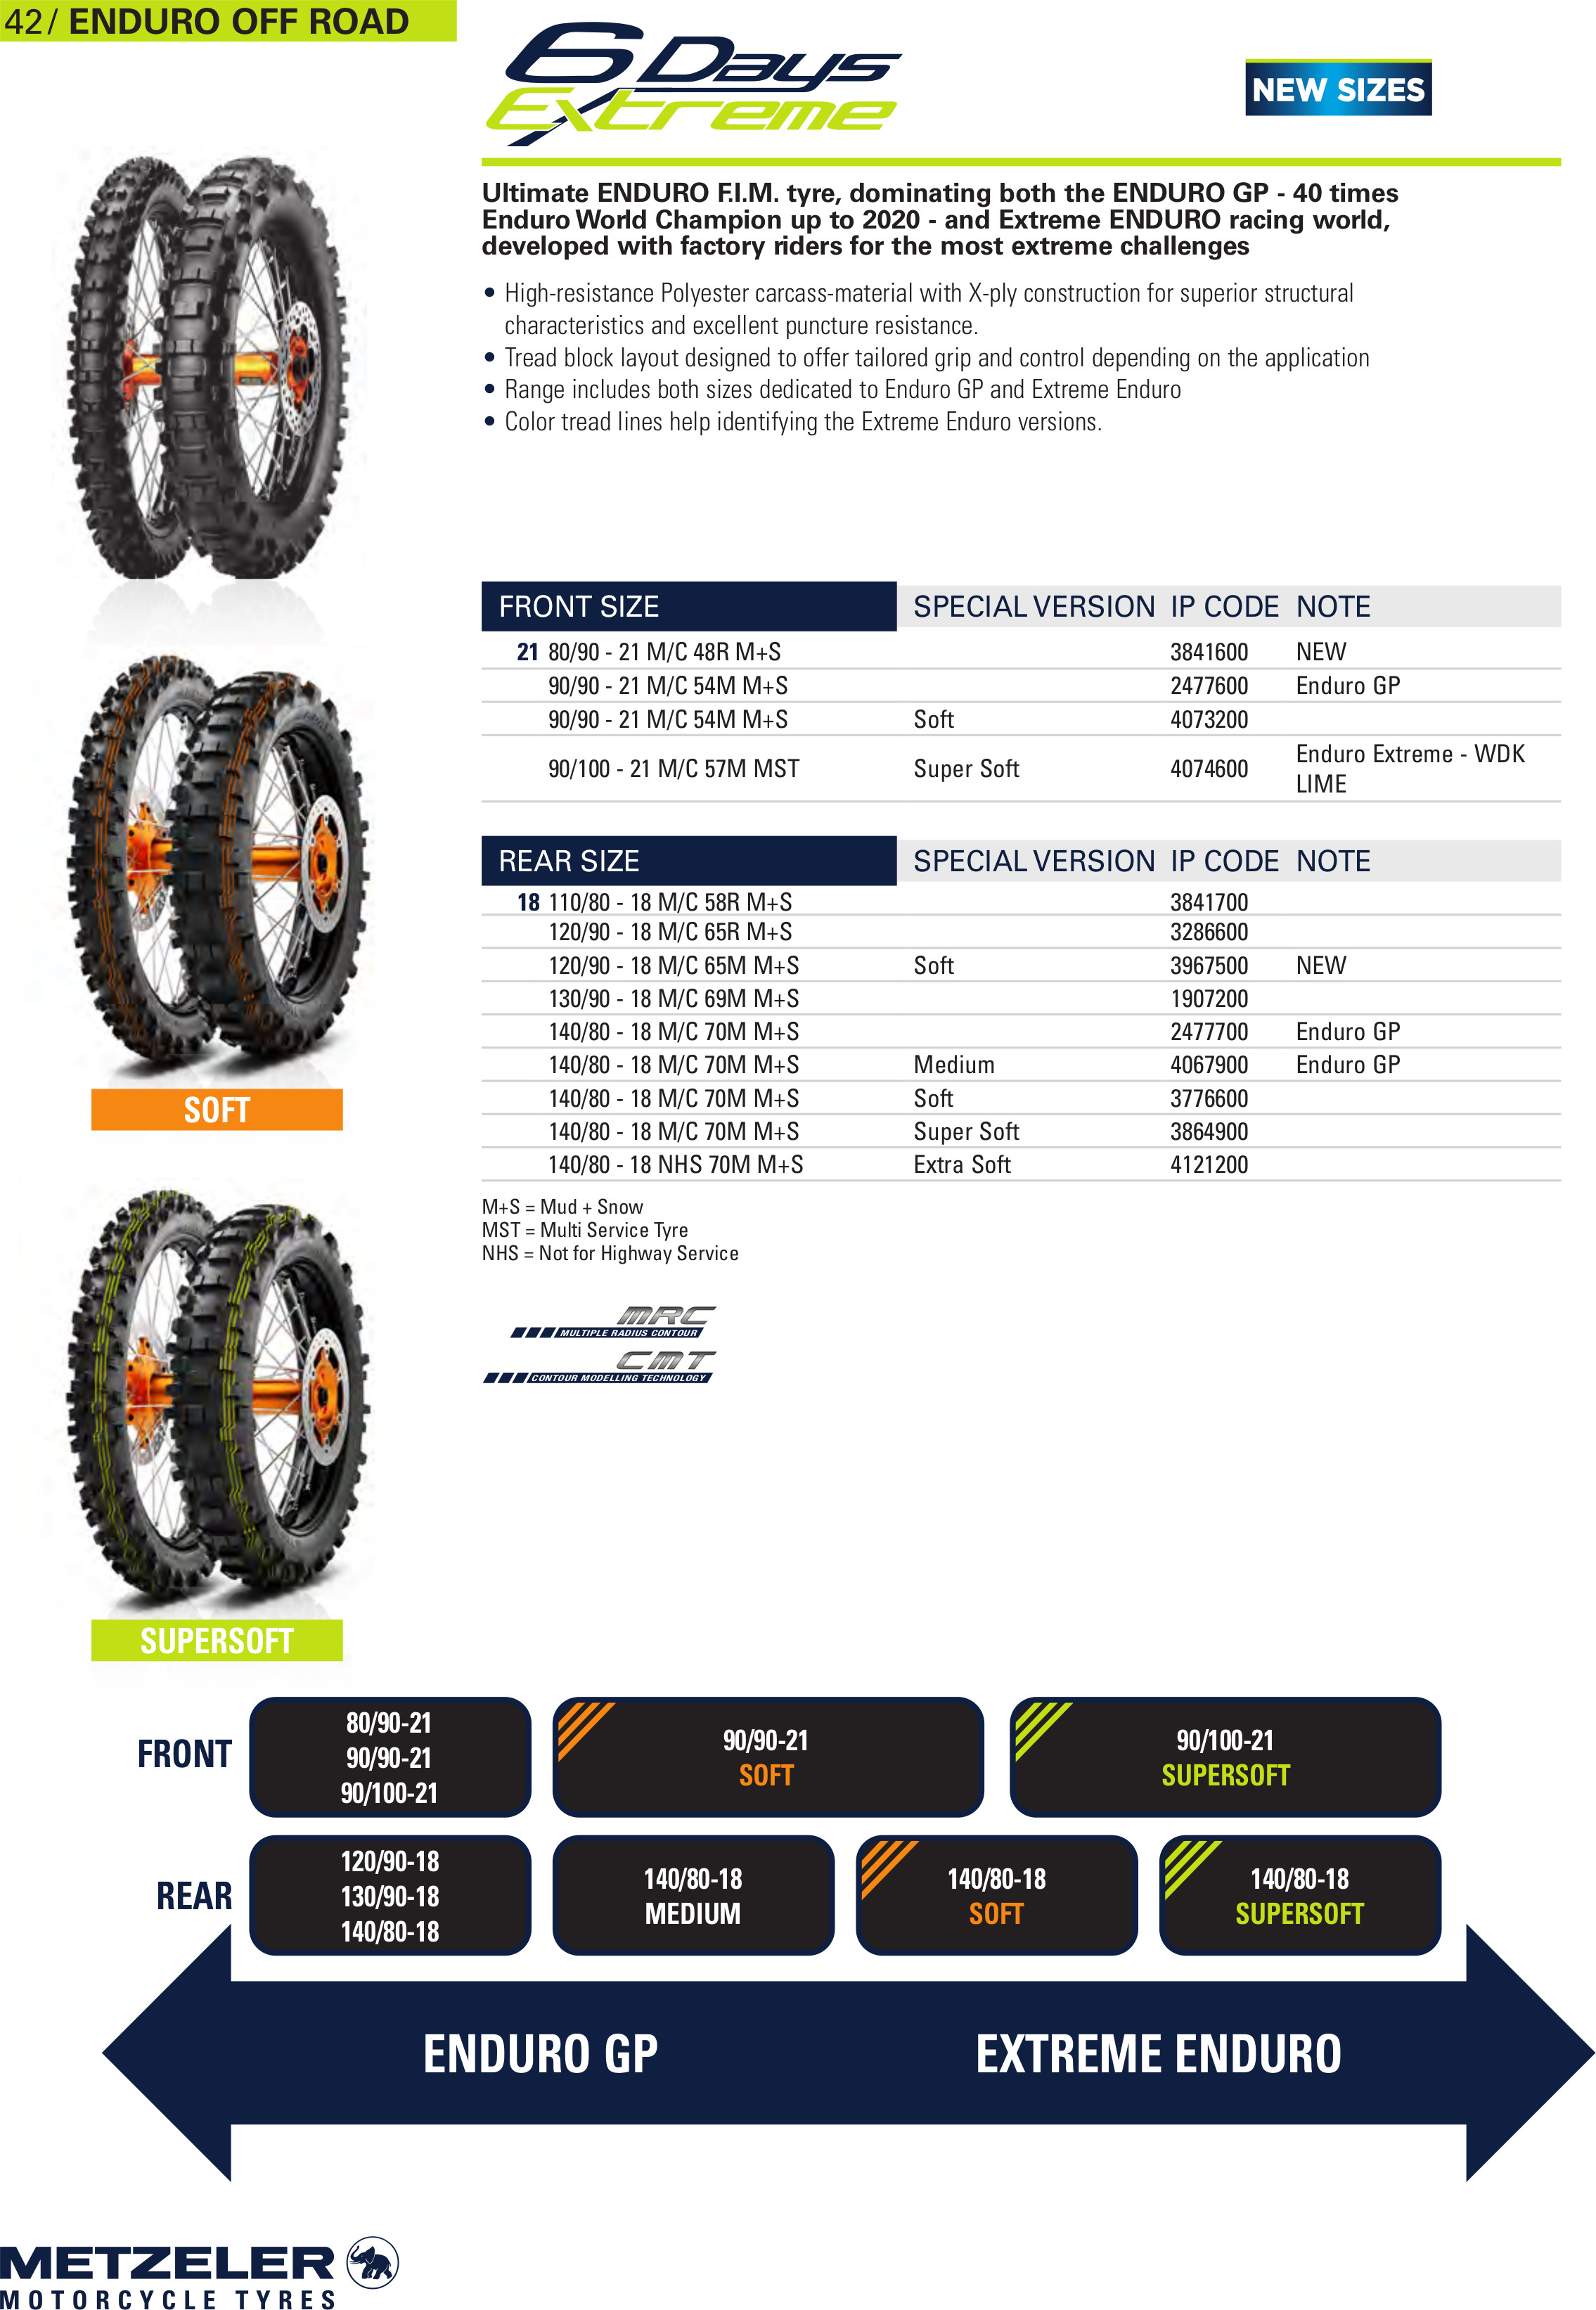 140/80-18 Six Days Extreme Rear Tire - Soft - M/C 70M M+S - Click Image to Close